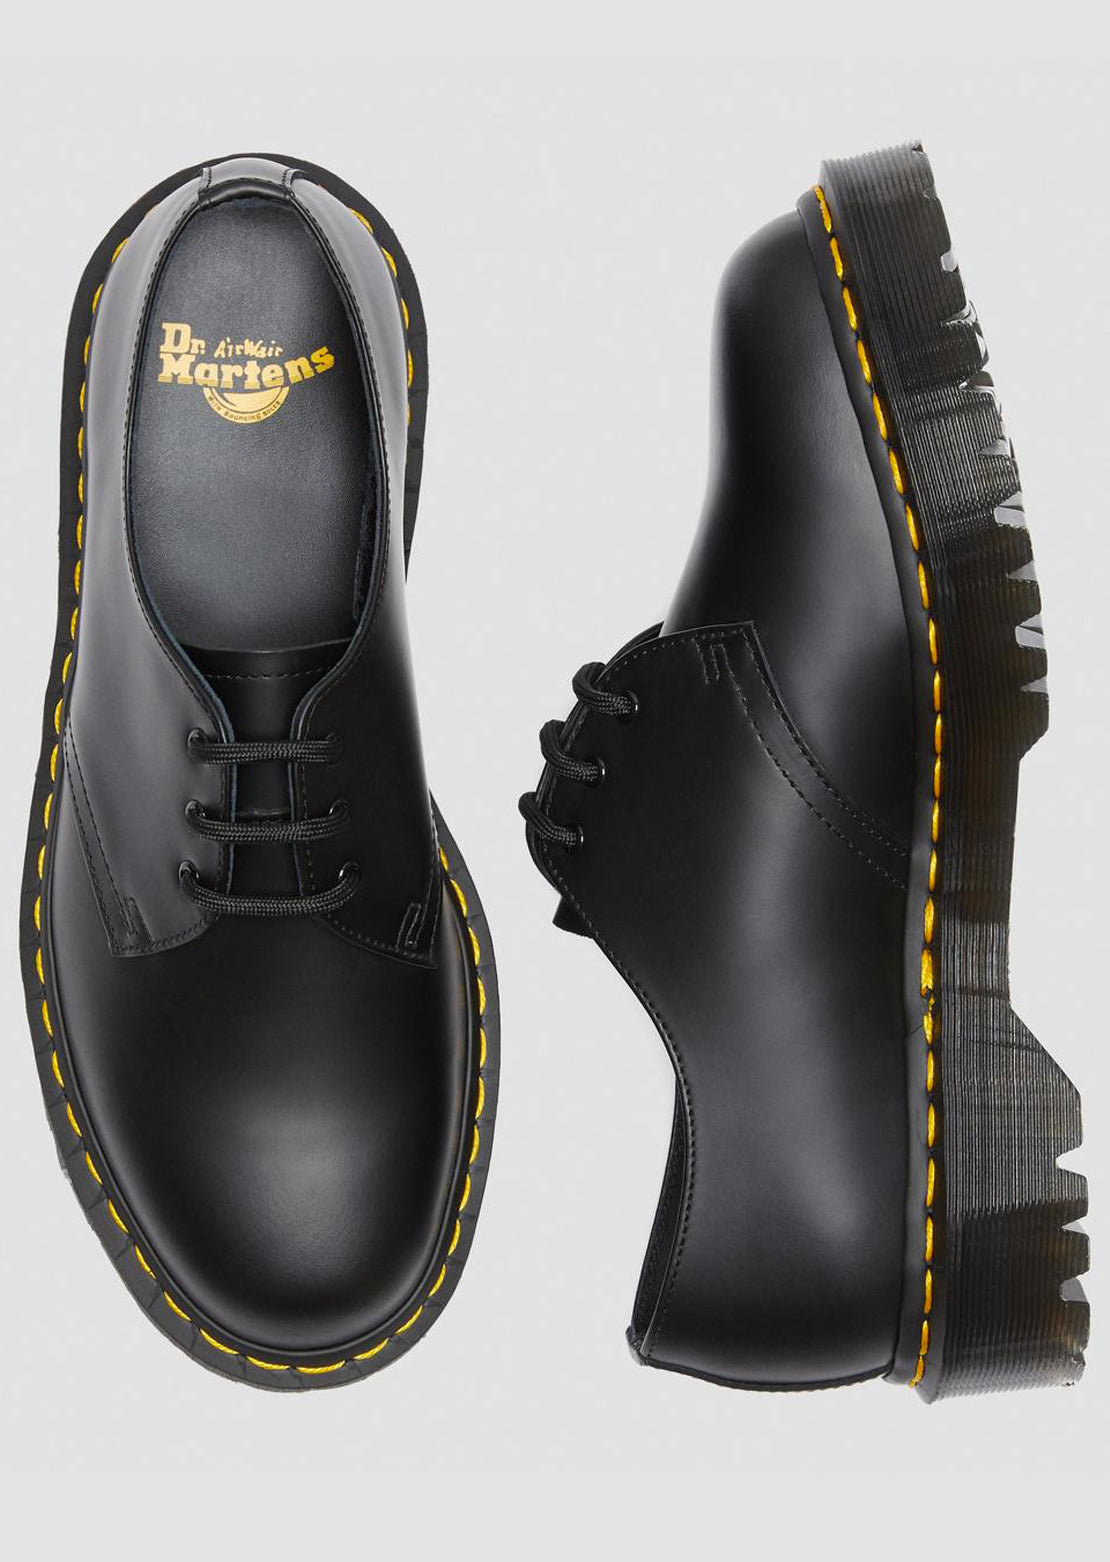 Dr.Martens Women’s 1461 Bex Shoes Black Smooth